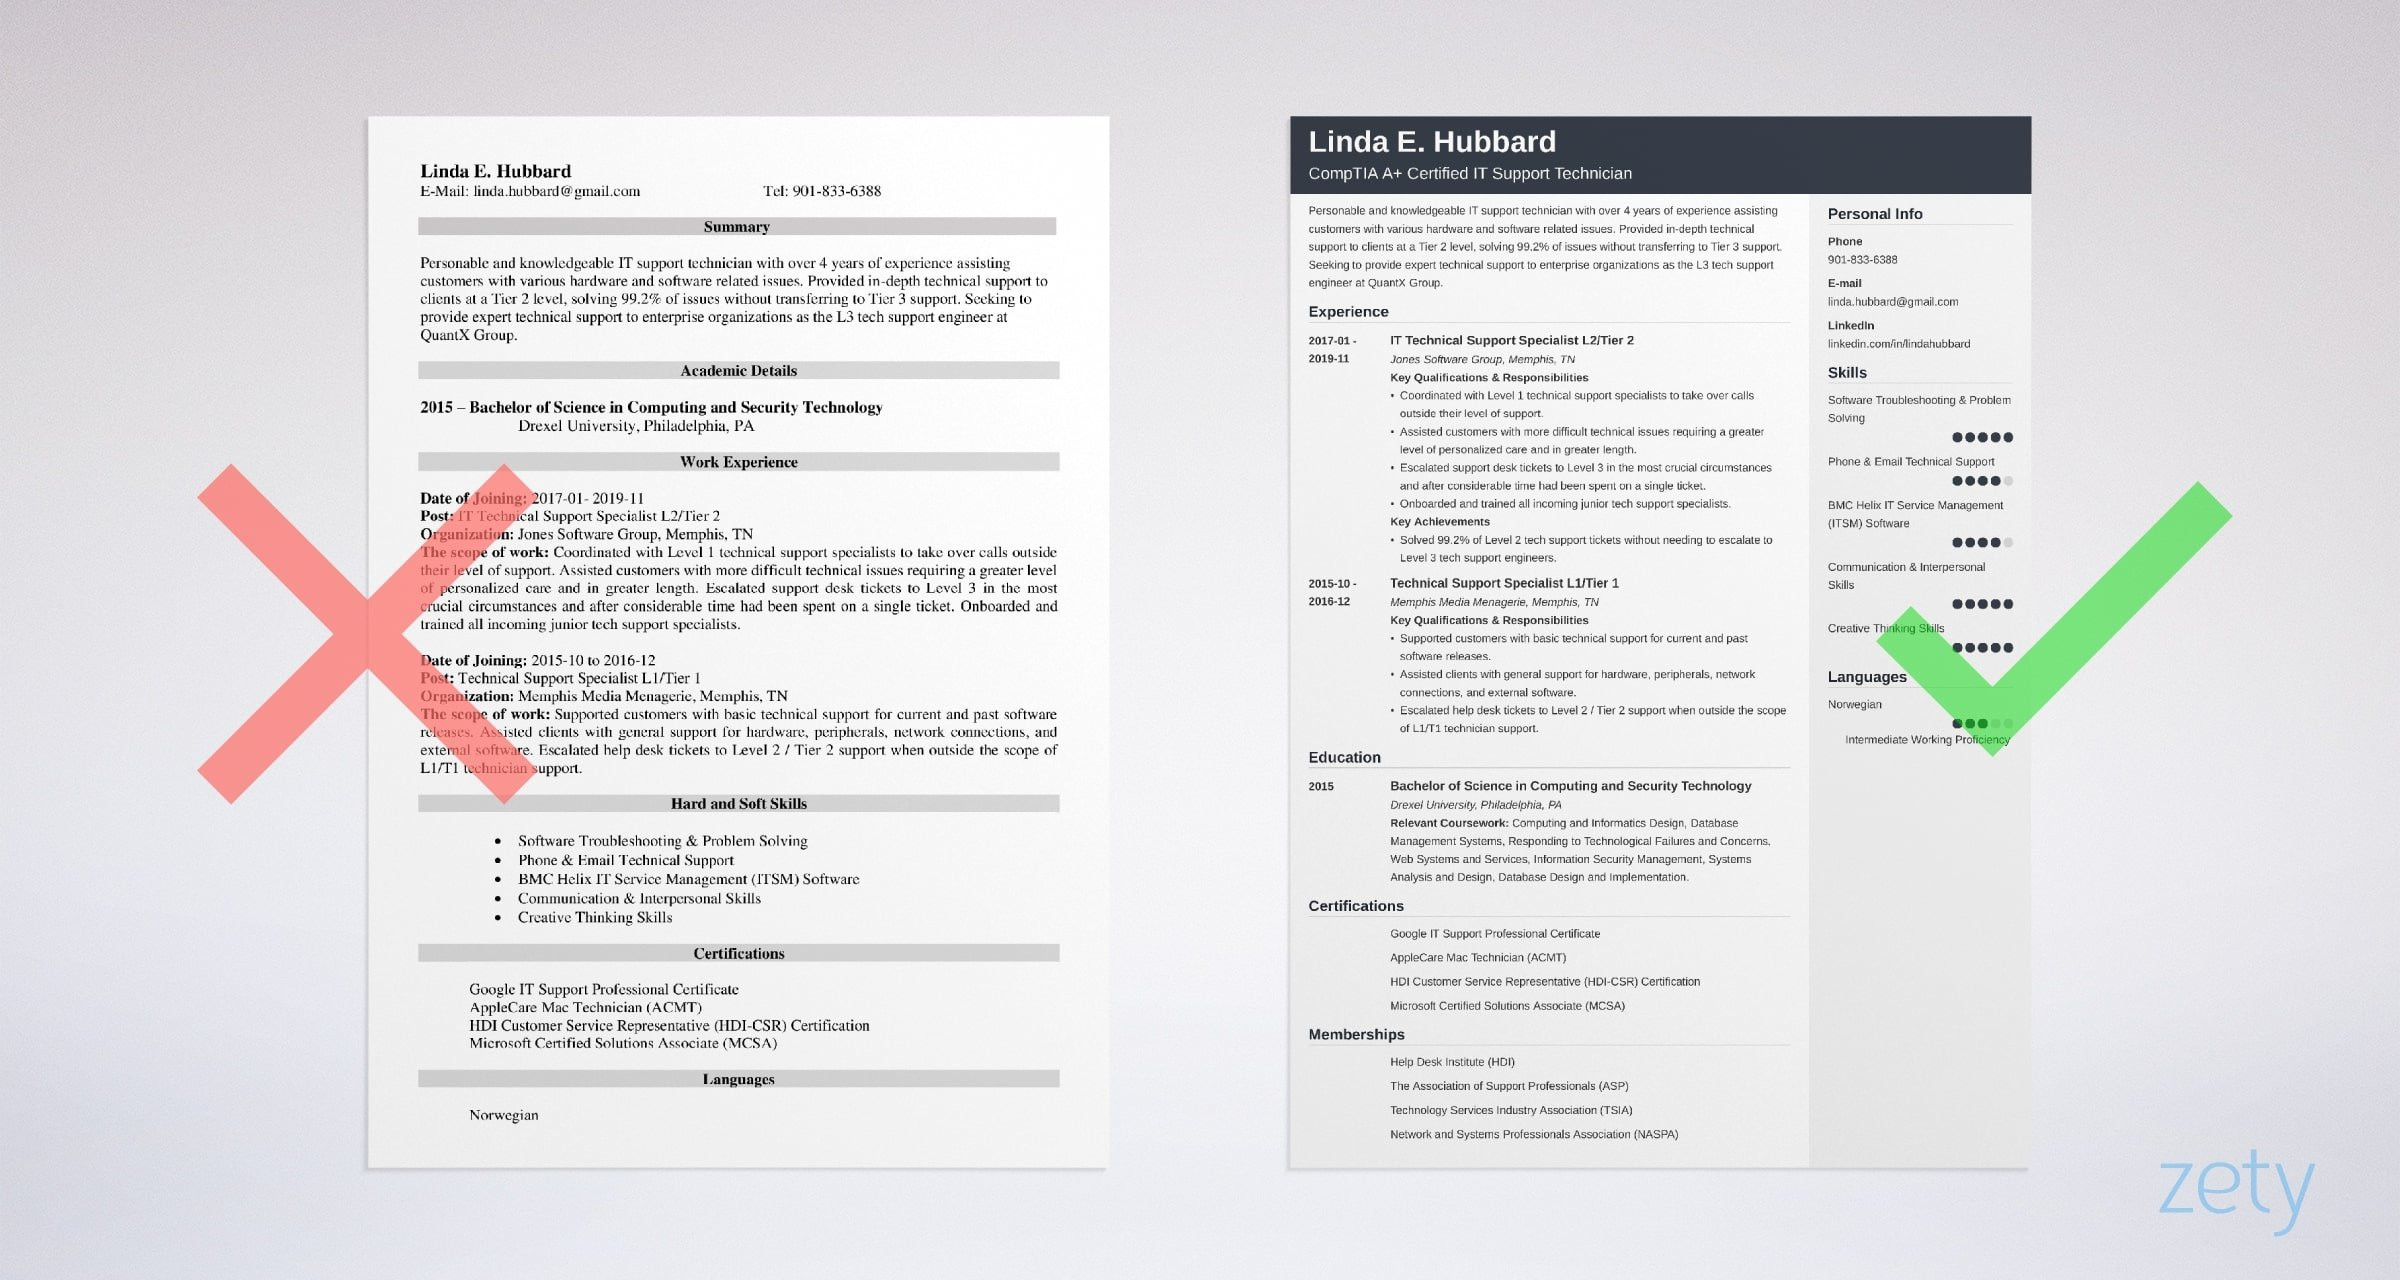 Sample Statement for Objective In Resume Technical Support Technical Support Resume Sample & Job Description [20 Tips]